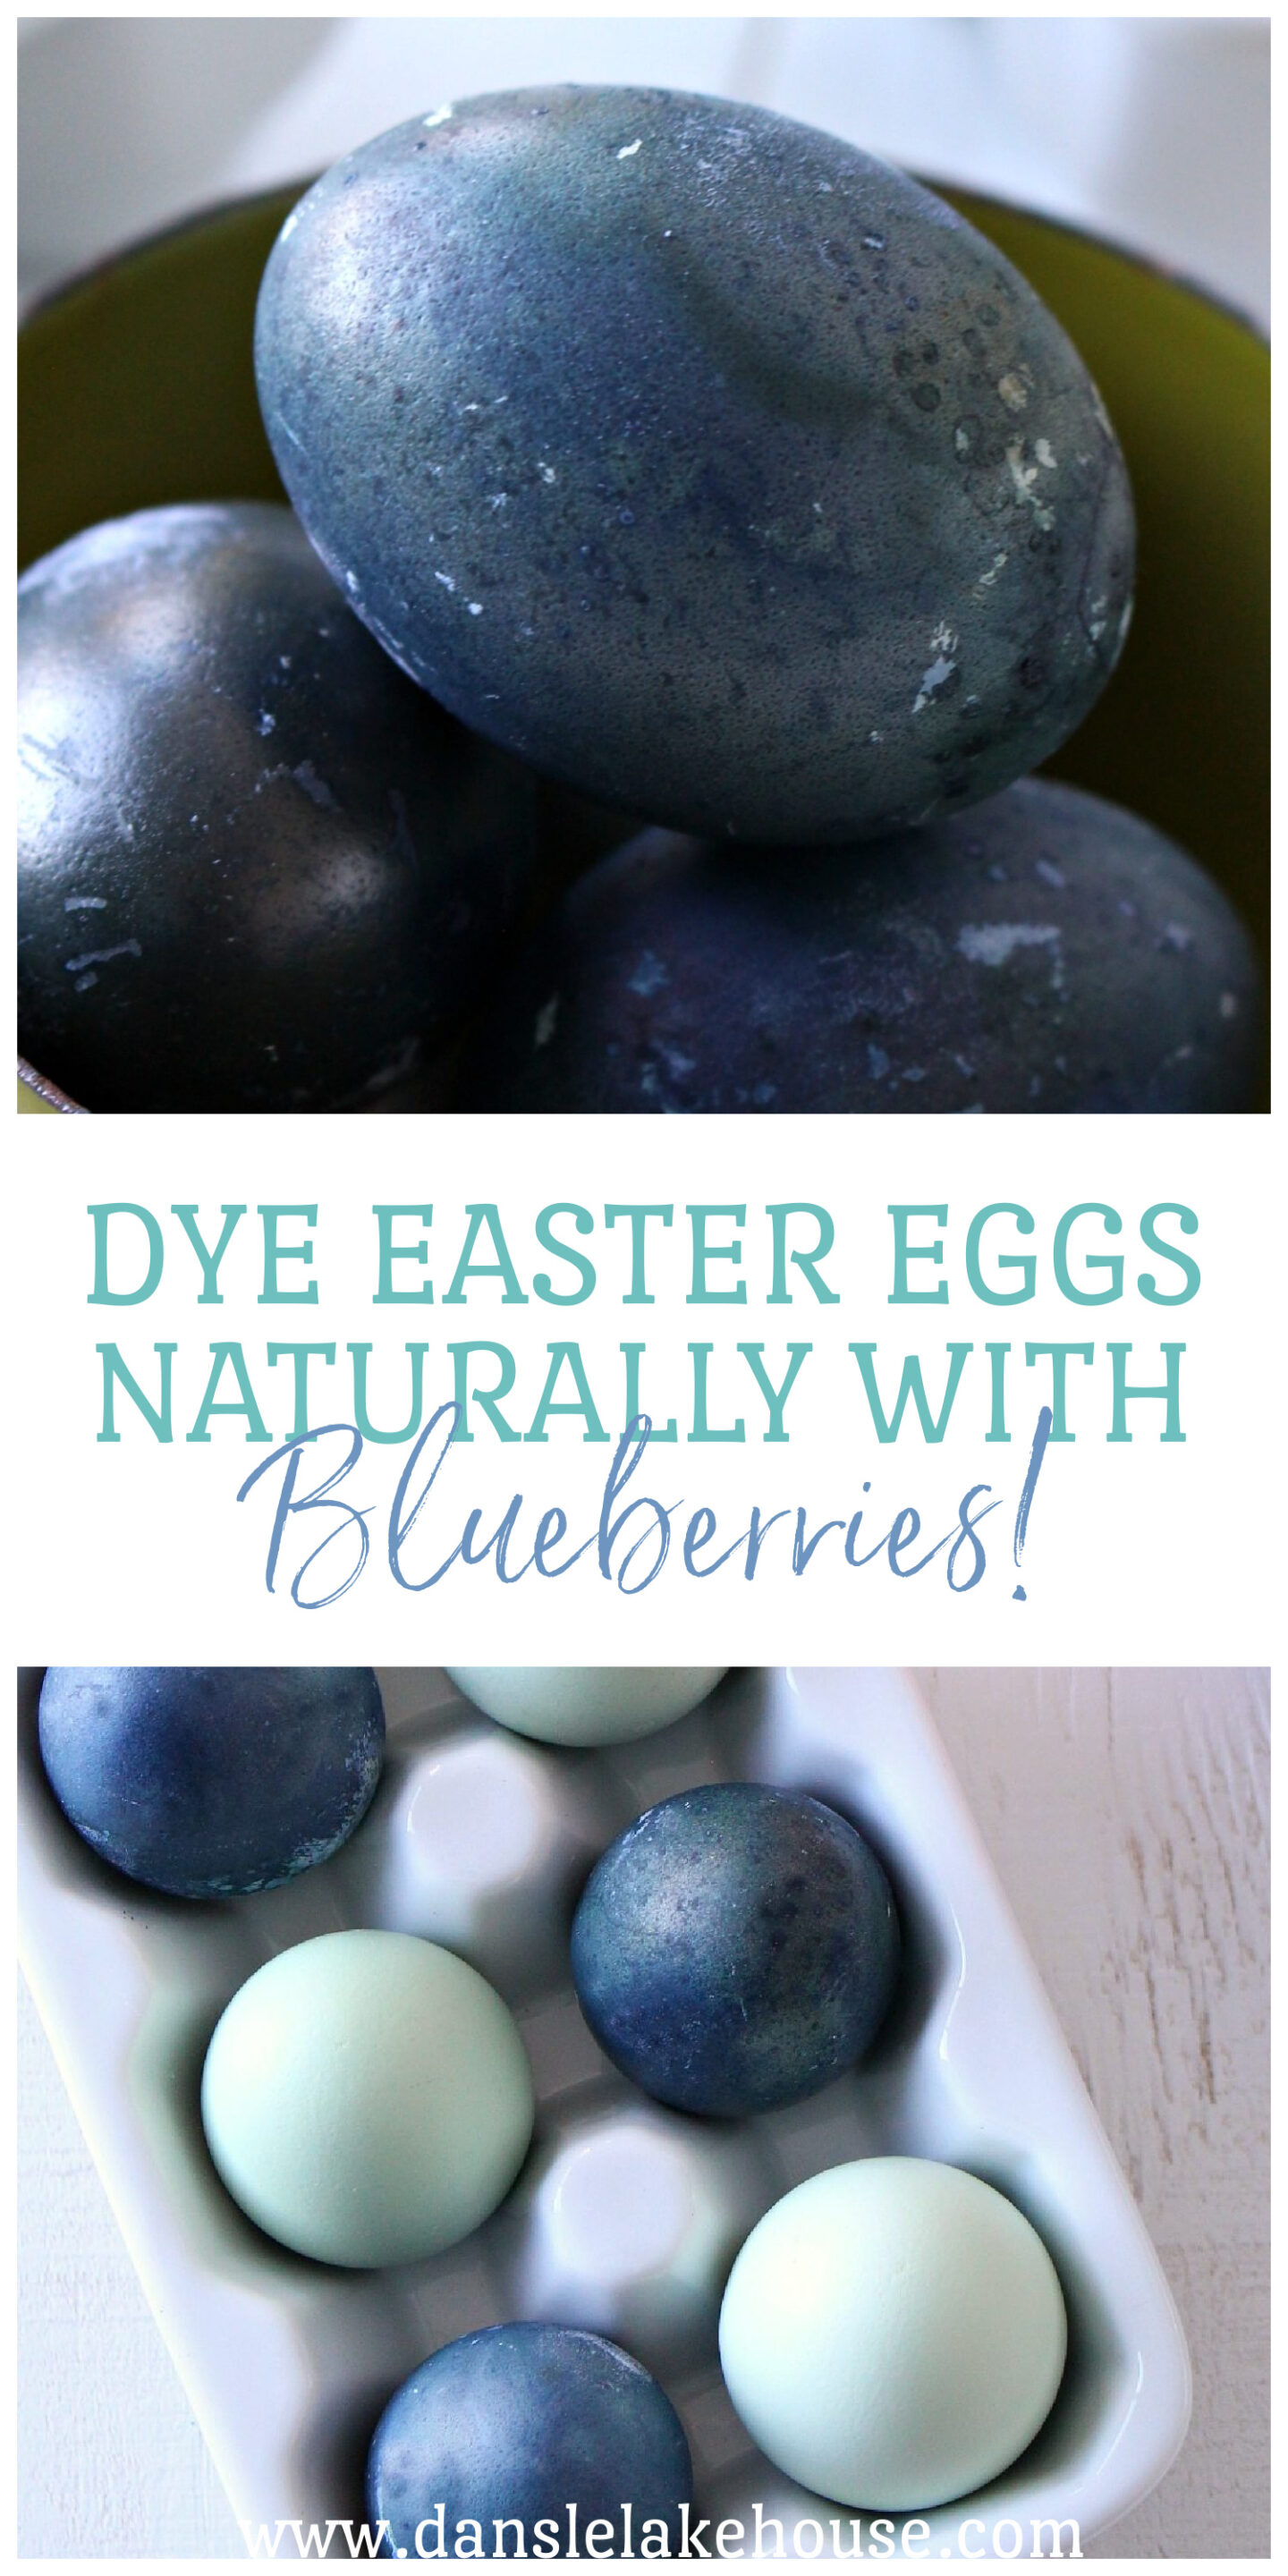 Dye Easter Eggs Naturally with Blueberries